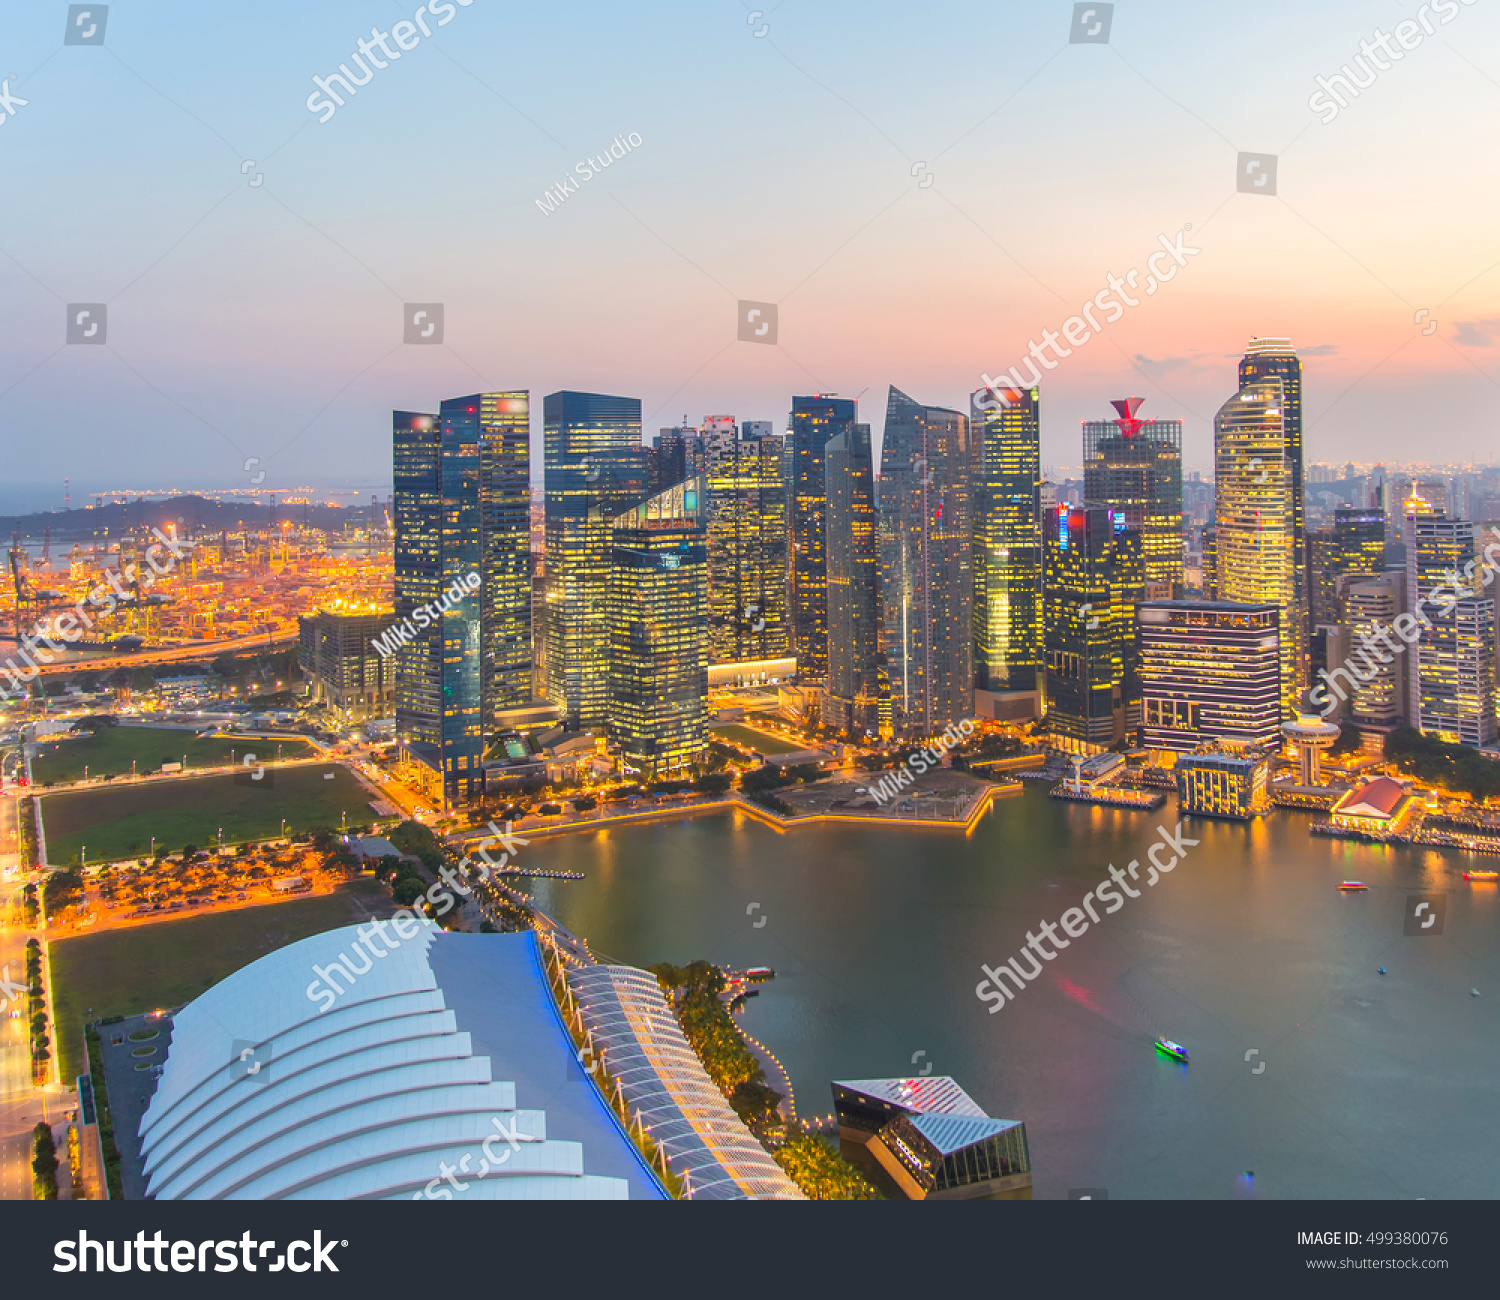 Landscape of the Singapore financial district and business building. #499380076